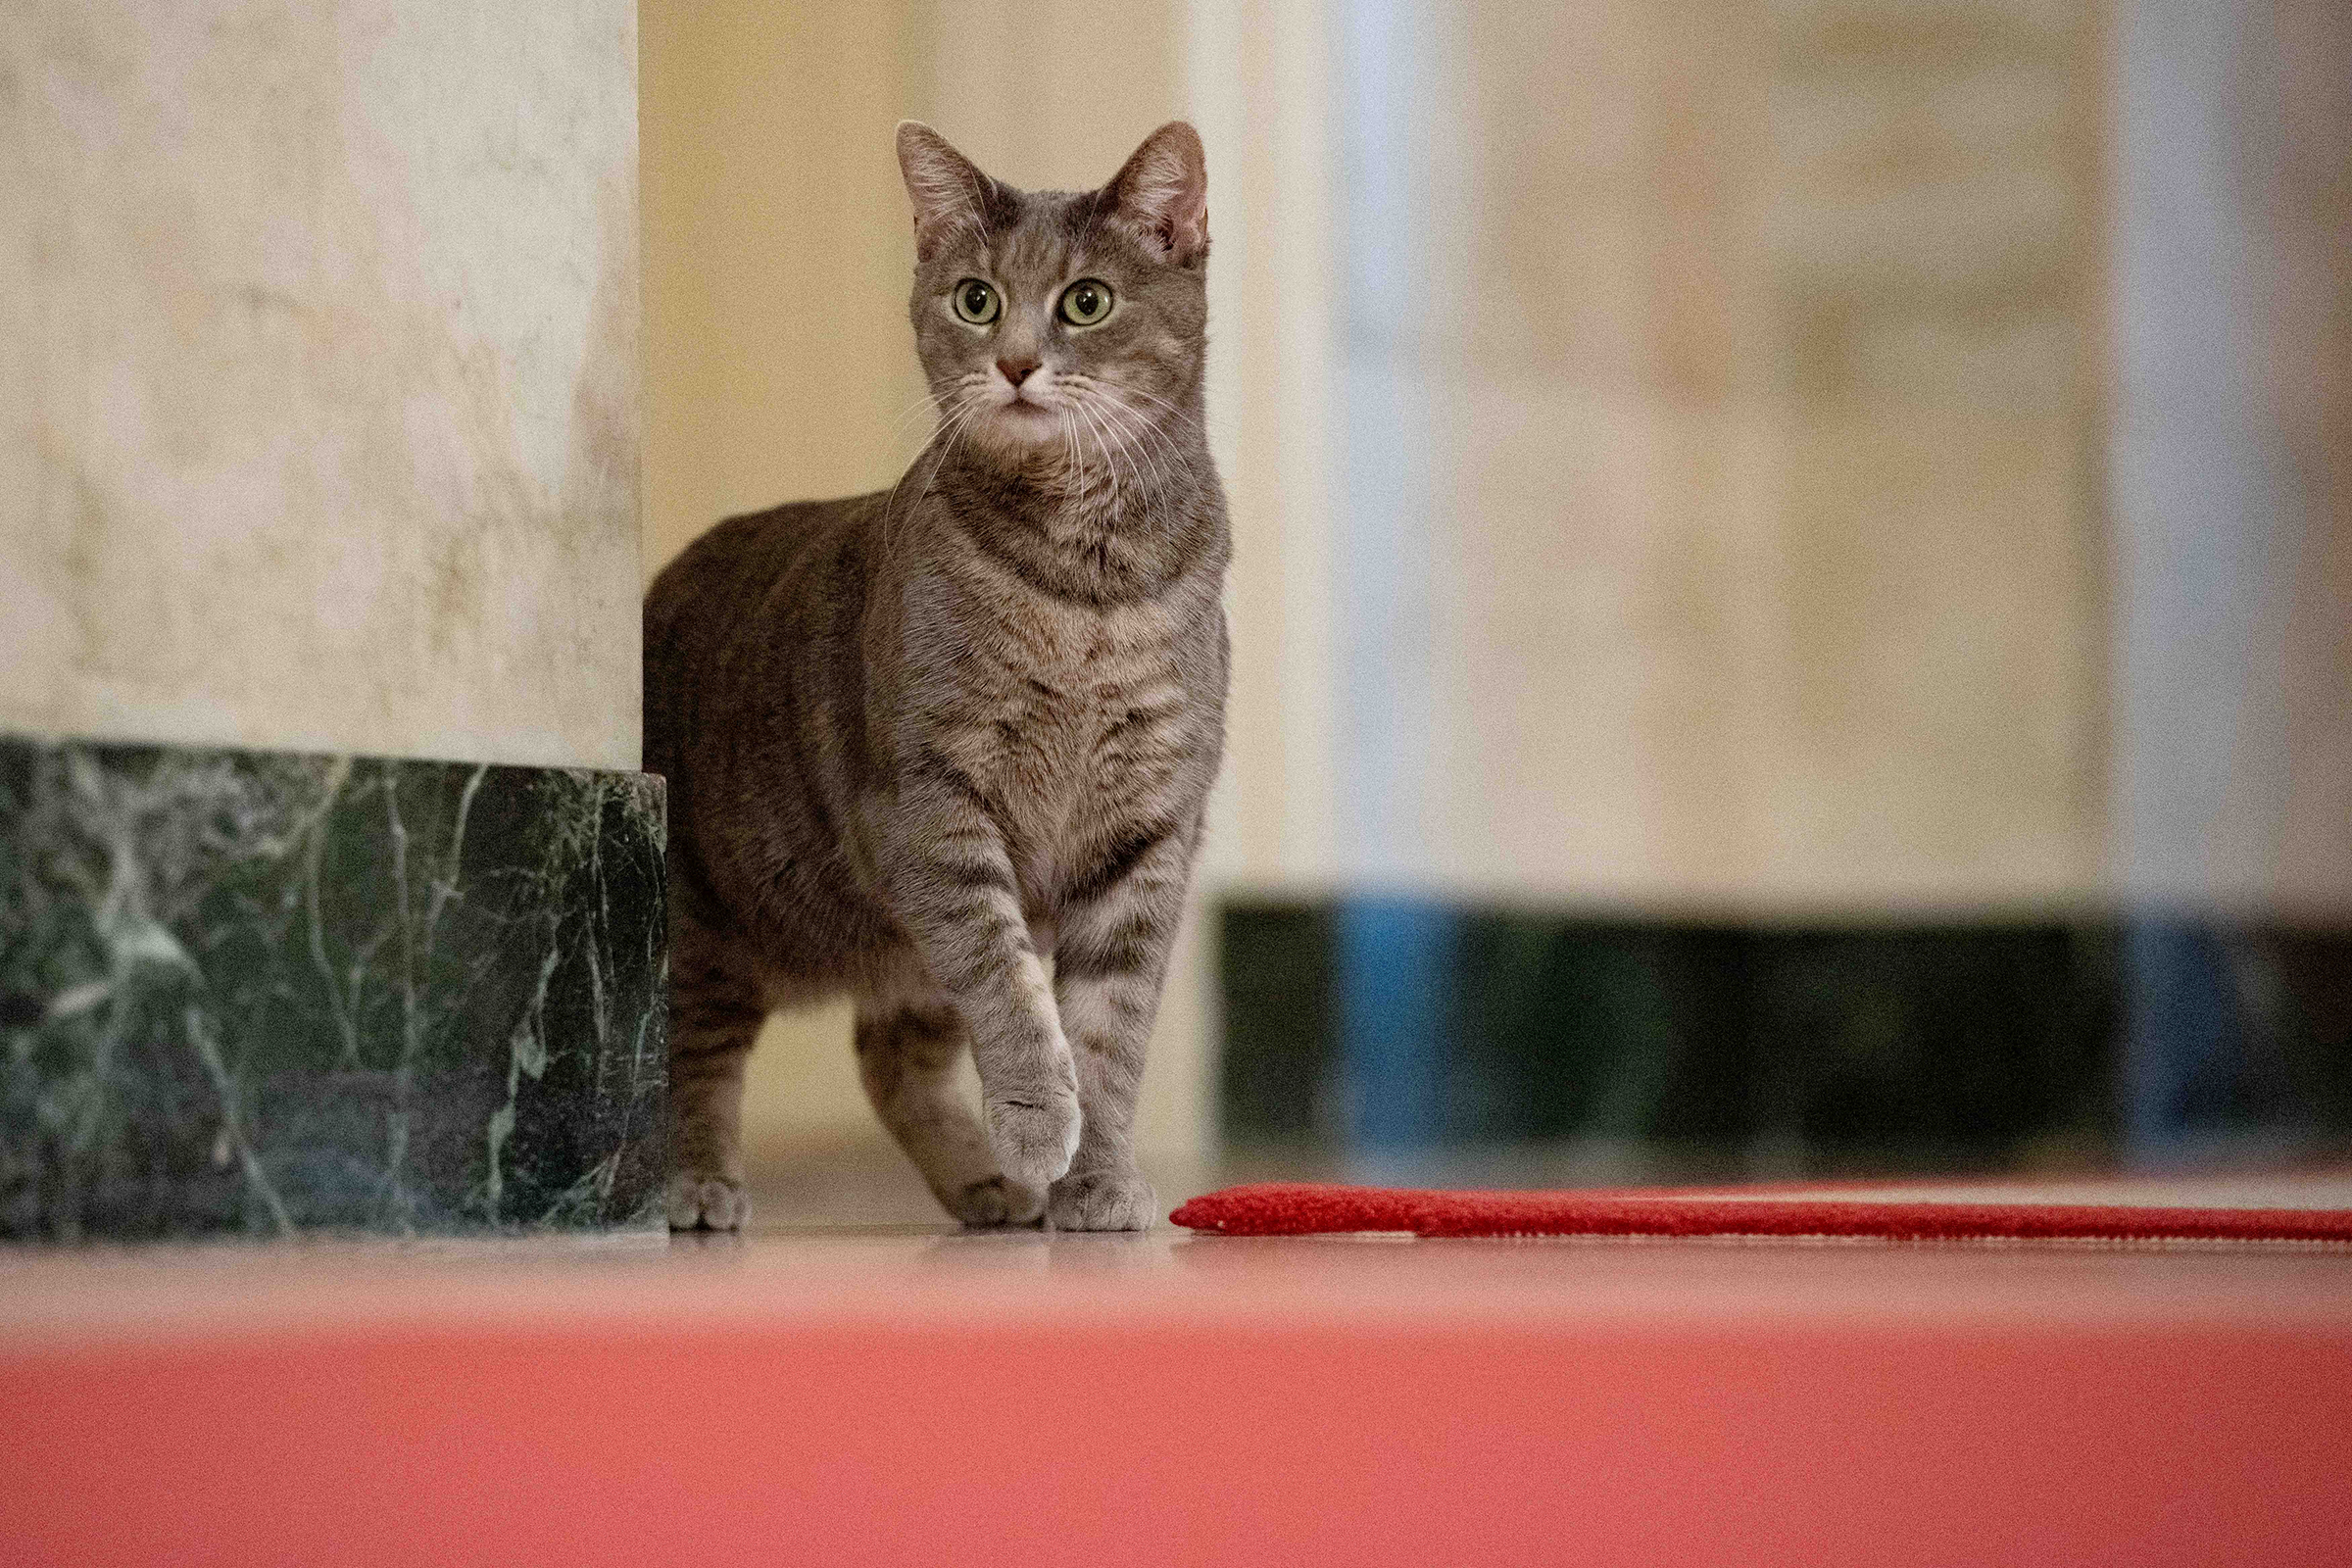 Willow, U.S. President Joe Biden and first lady Jill Biden’s new pet cat, is seen in a White House handout photo as she wanders through the halls of the White House on Jan. 27, 2022. (Erin Scott—The White House/REUTERS)